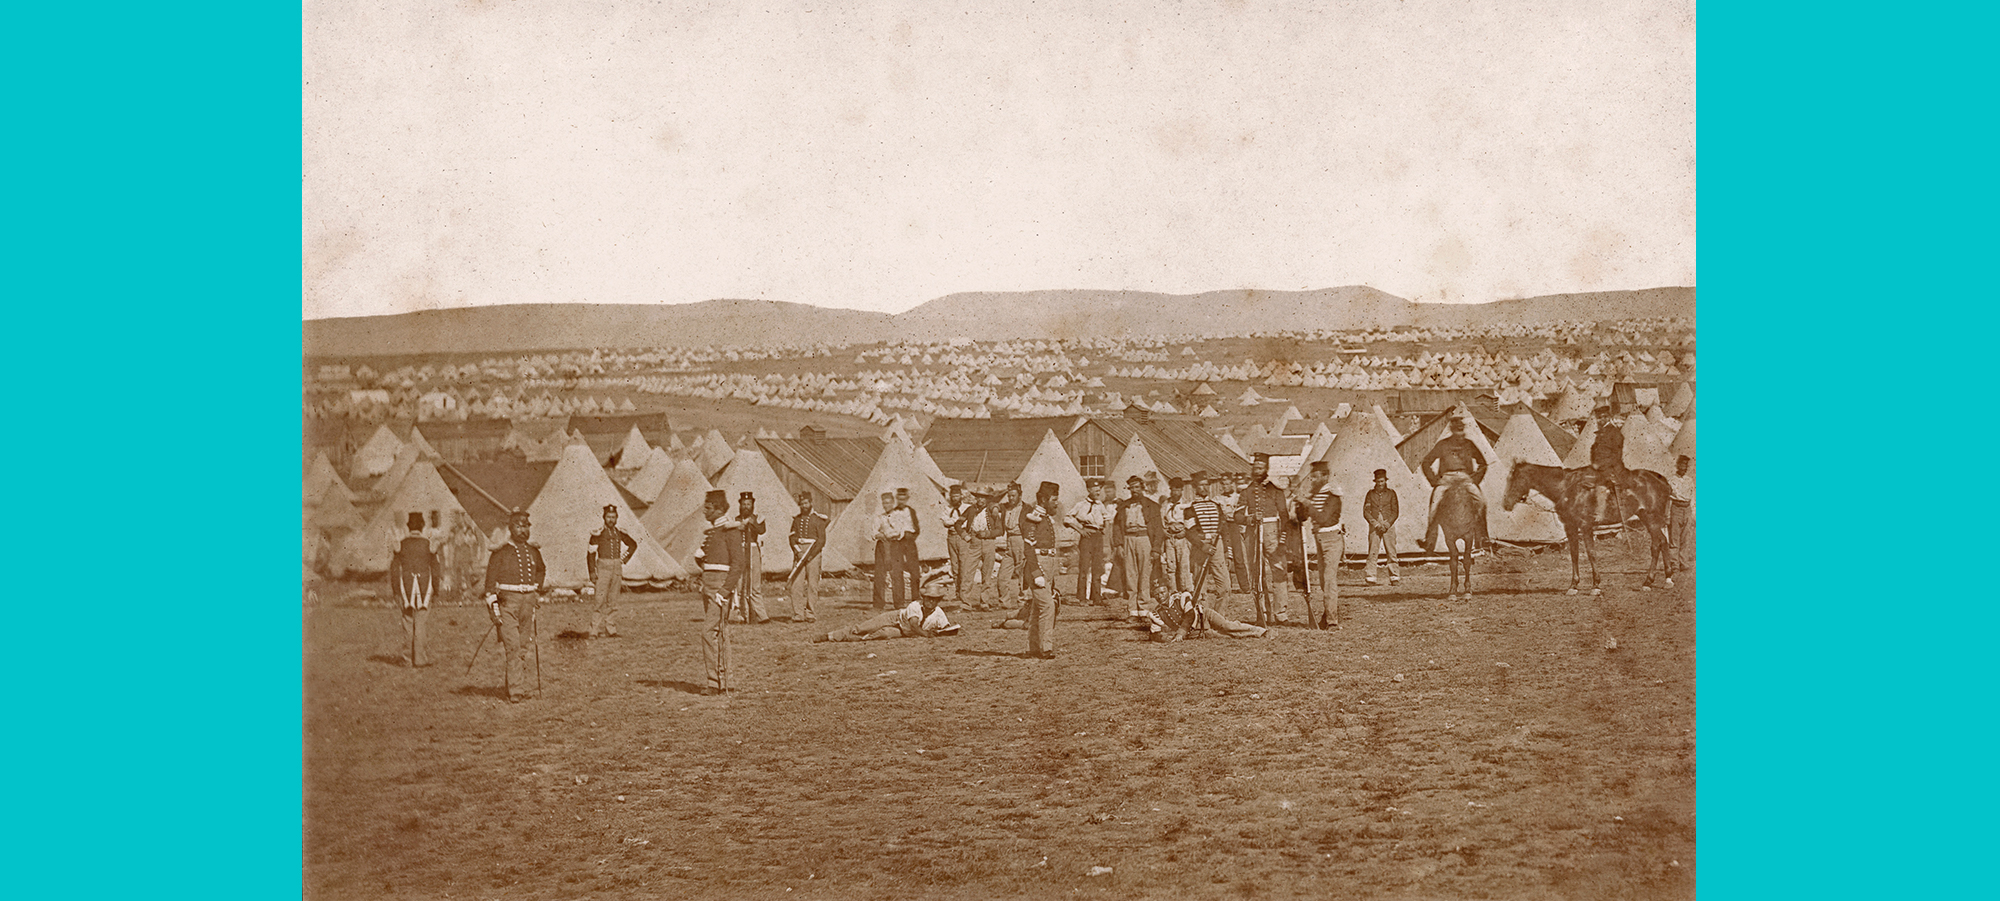 photograph taken of men at a camp standing in soldier uniform in front of tents